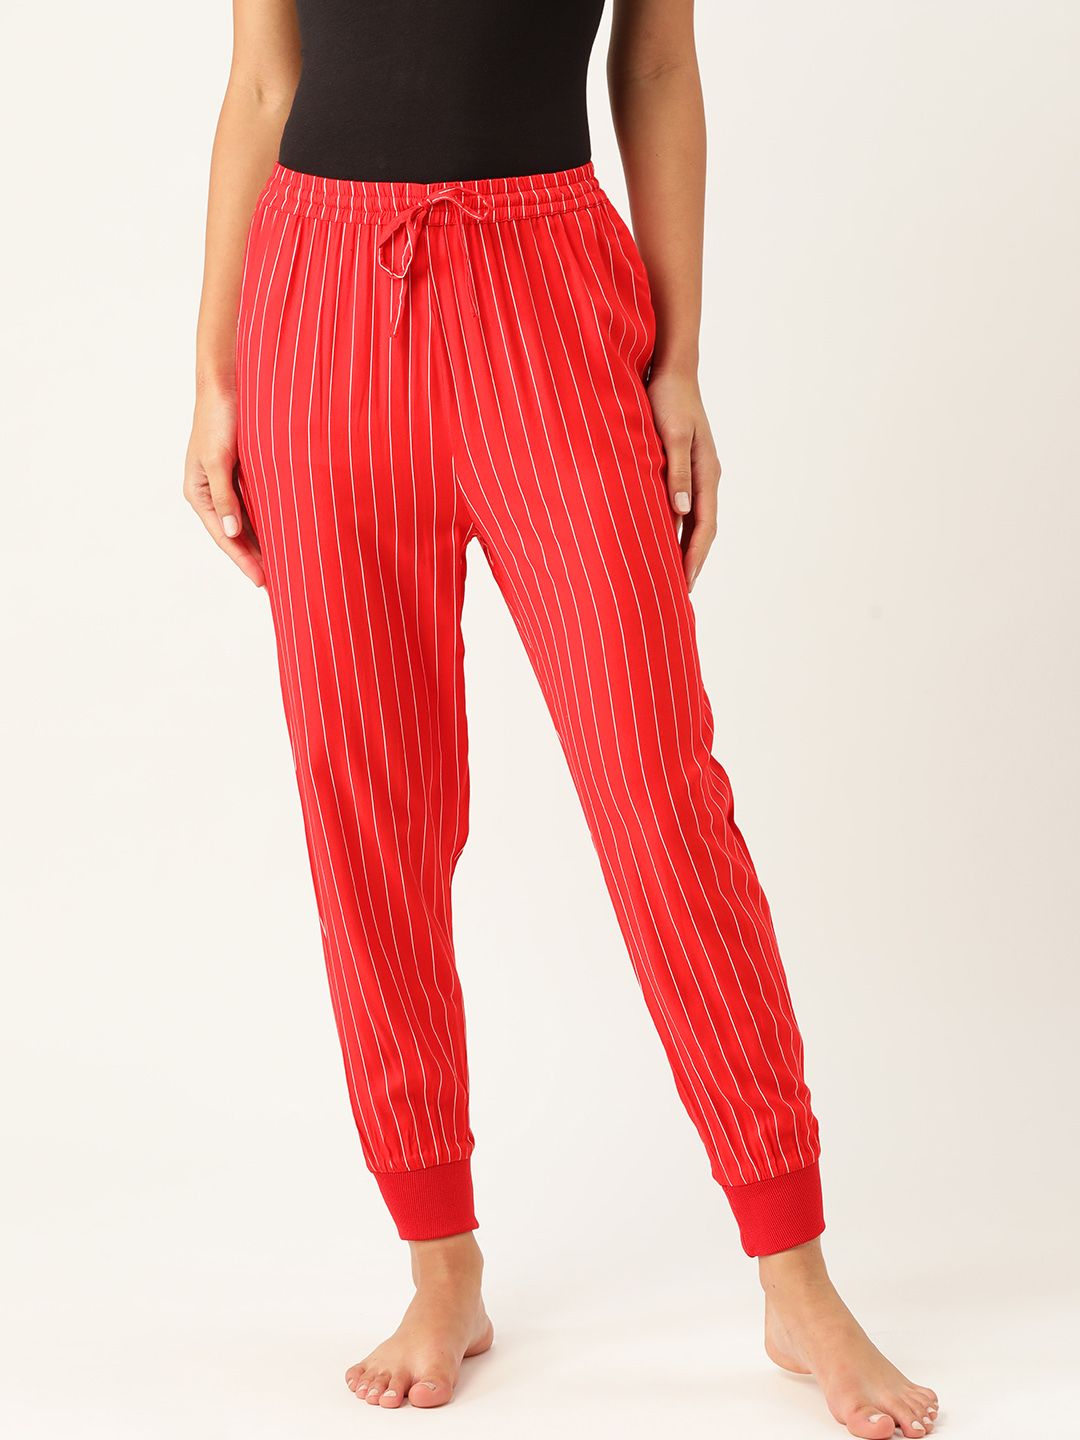 ETC Women Red & White Striped Jogger Style Lounge Pants Price in India